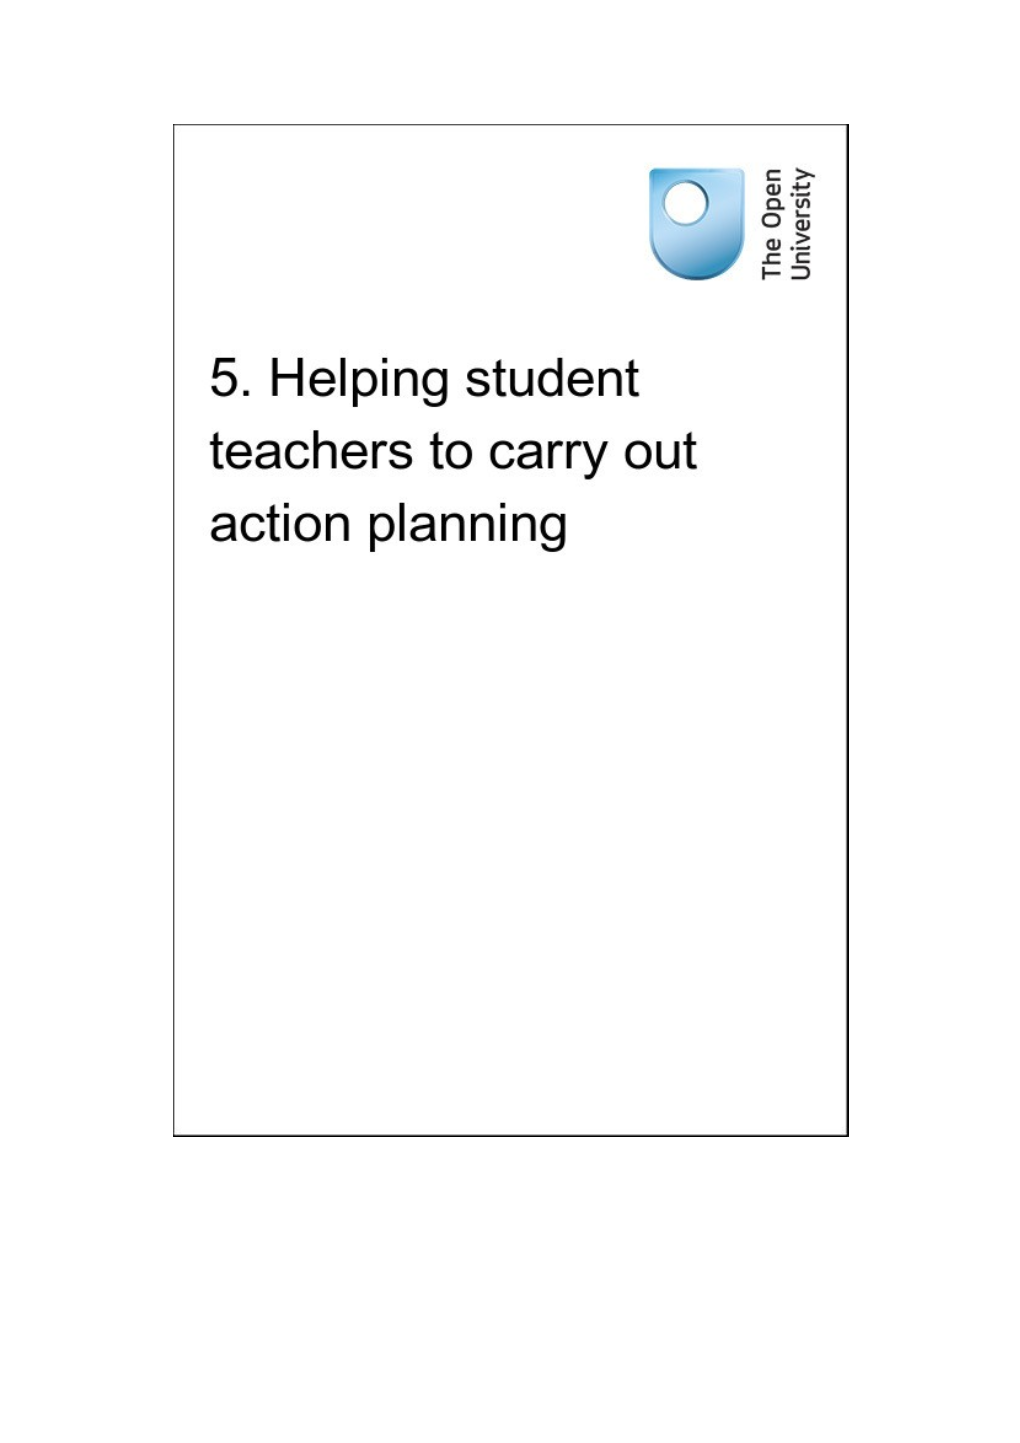 5. Helping Student Teachers to Carry out Action Planning